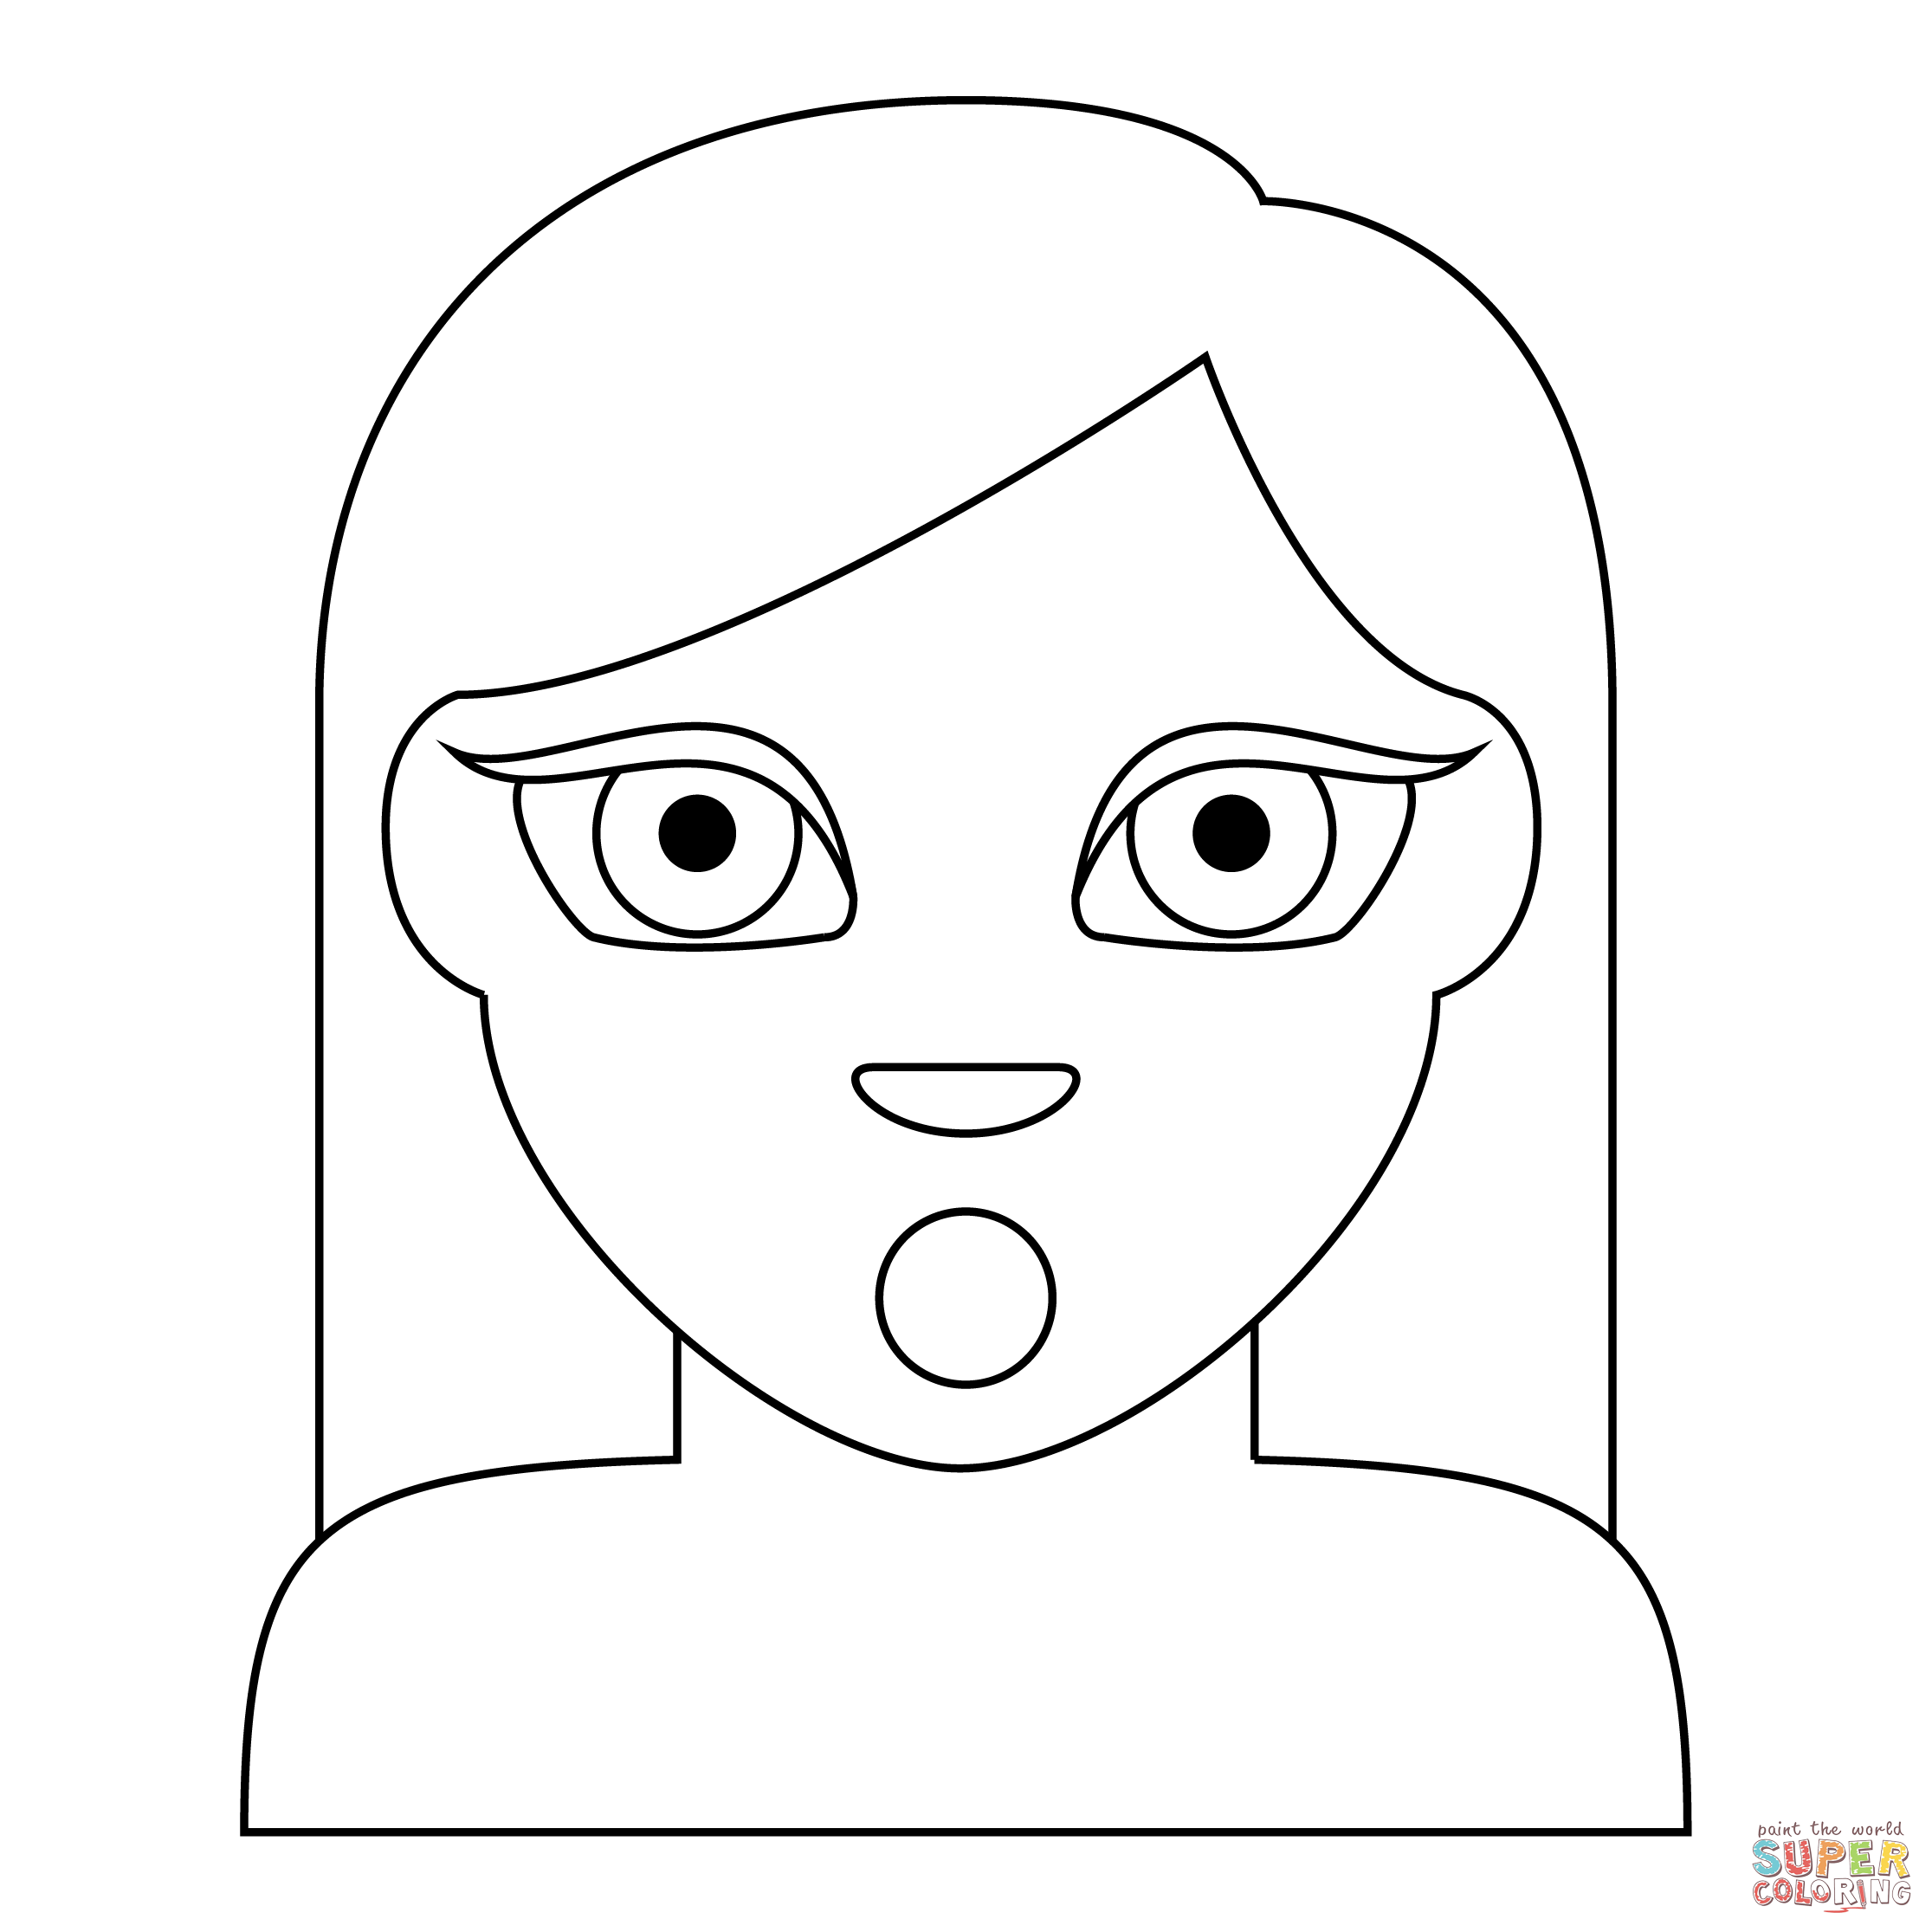 Person Pouting coloring page | Free Printable Coloring Pages